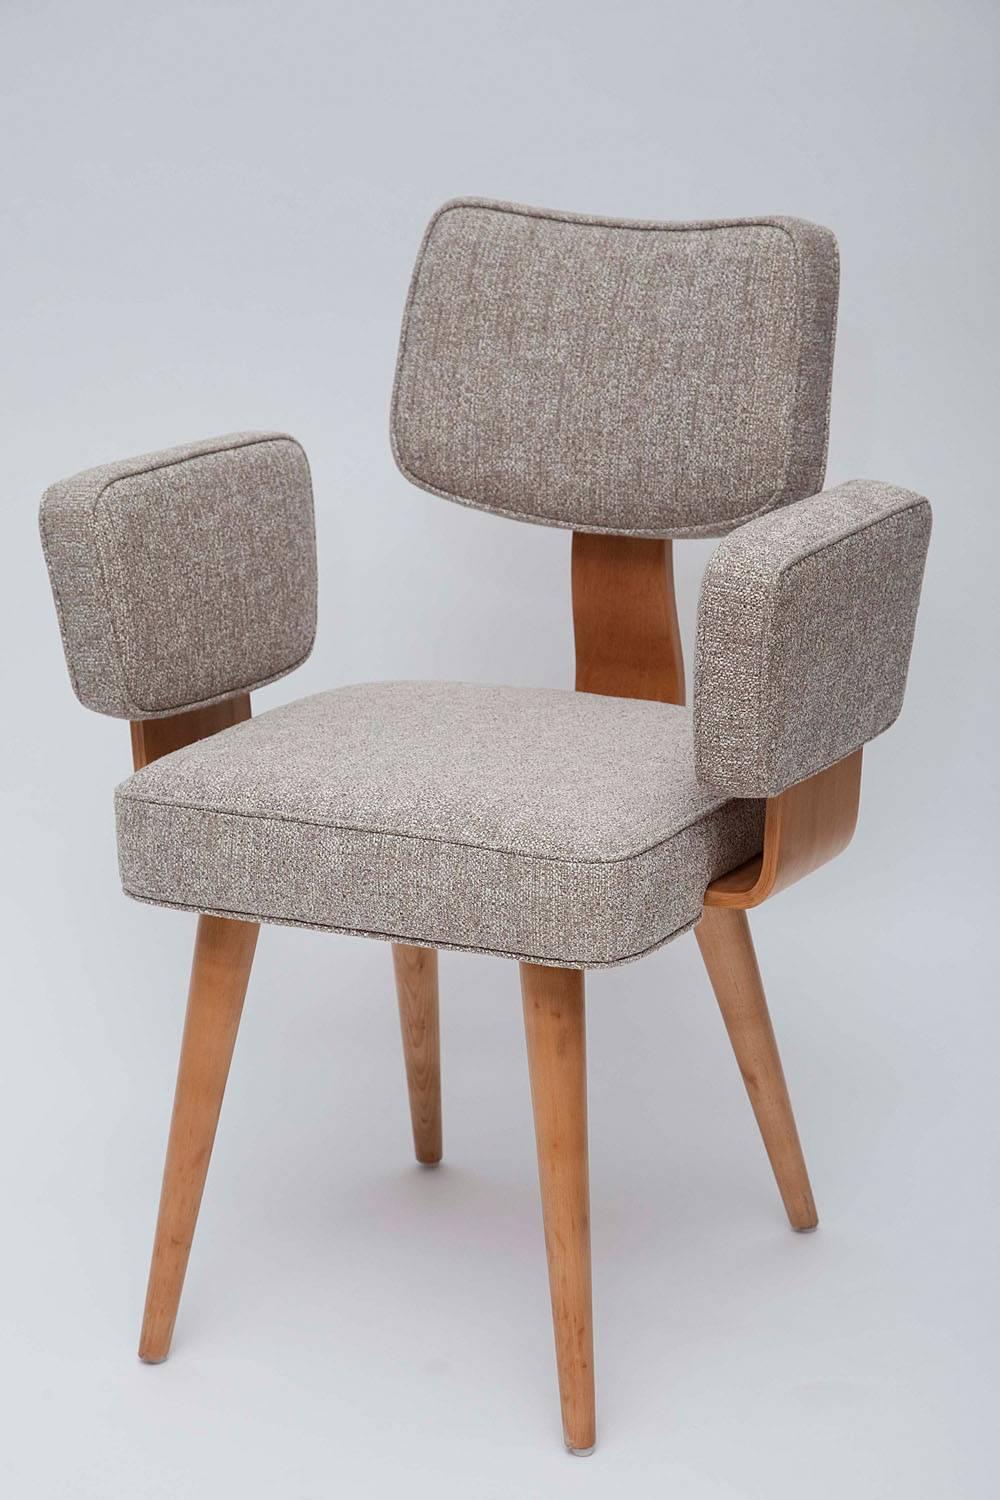 We're charmed by the Classic Mid-Century form of these very special Thonet bentwood armchairs. Refinished and newly upholstered in a soft but durable mini-tweed.